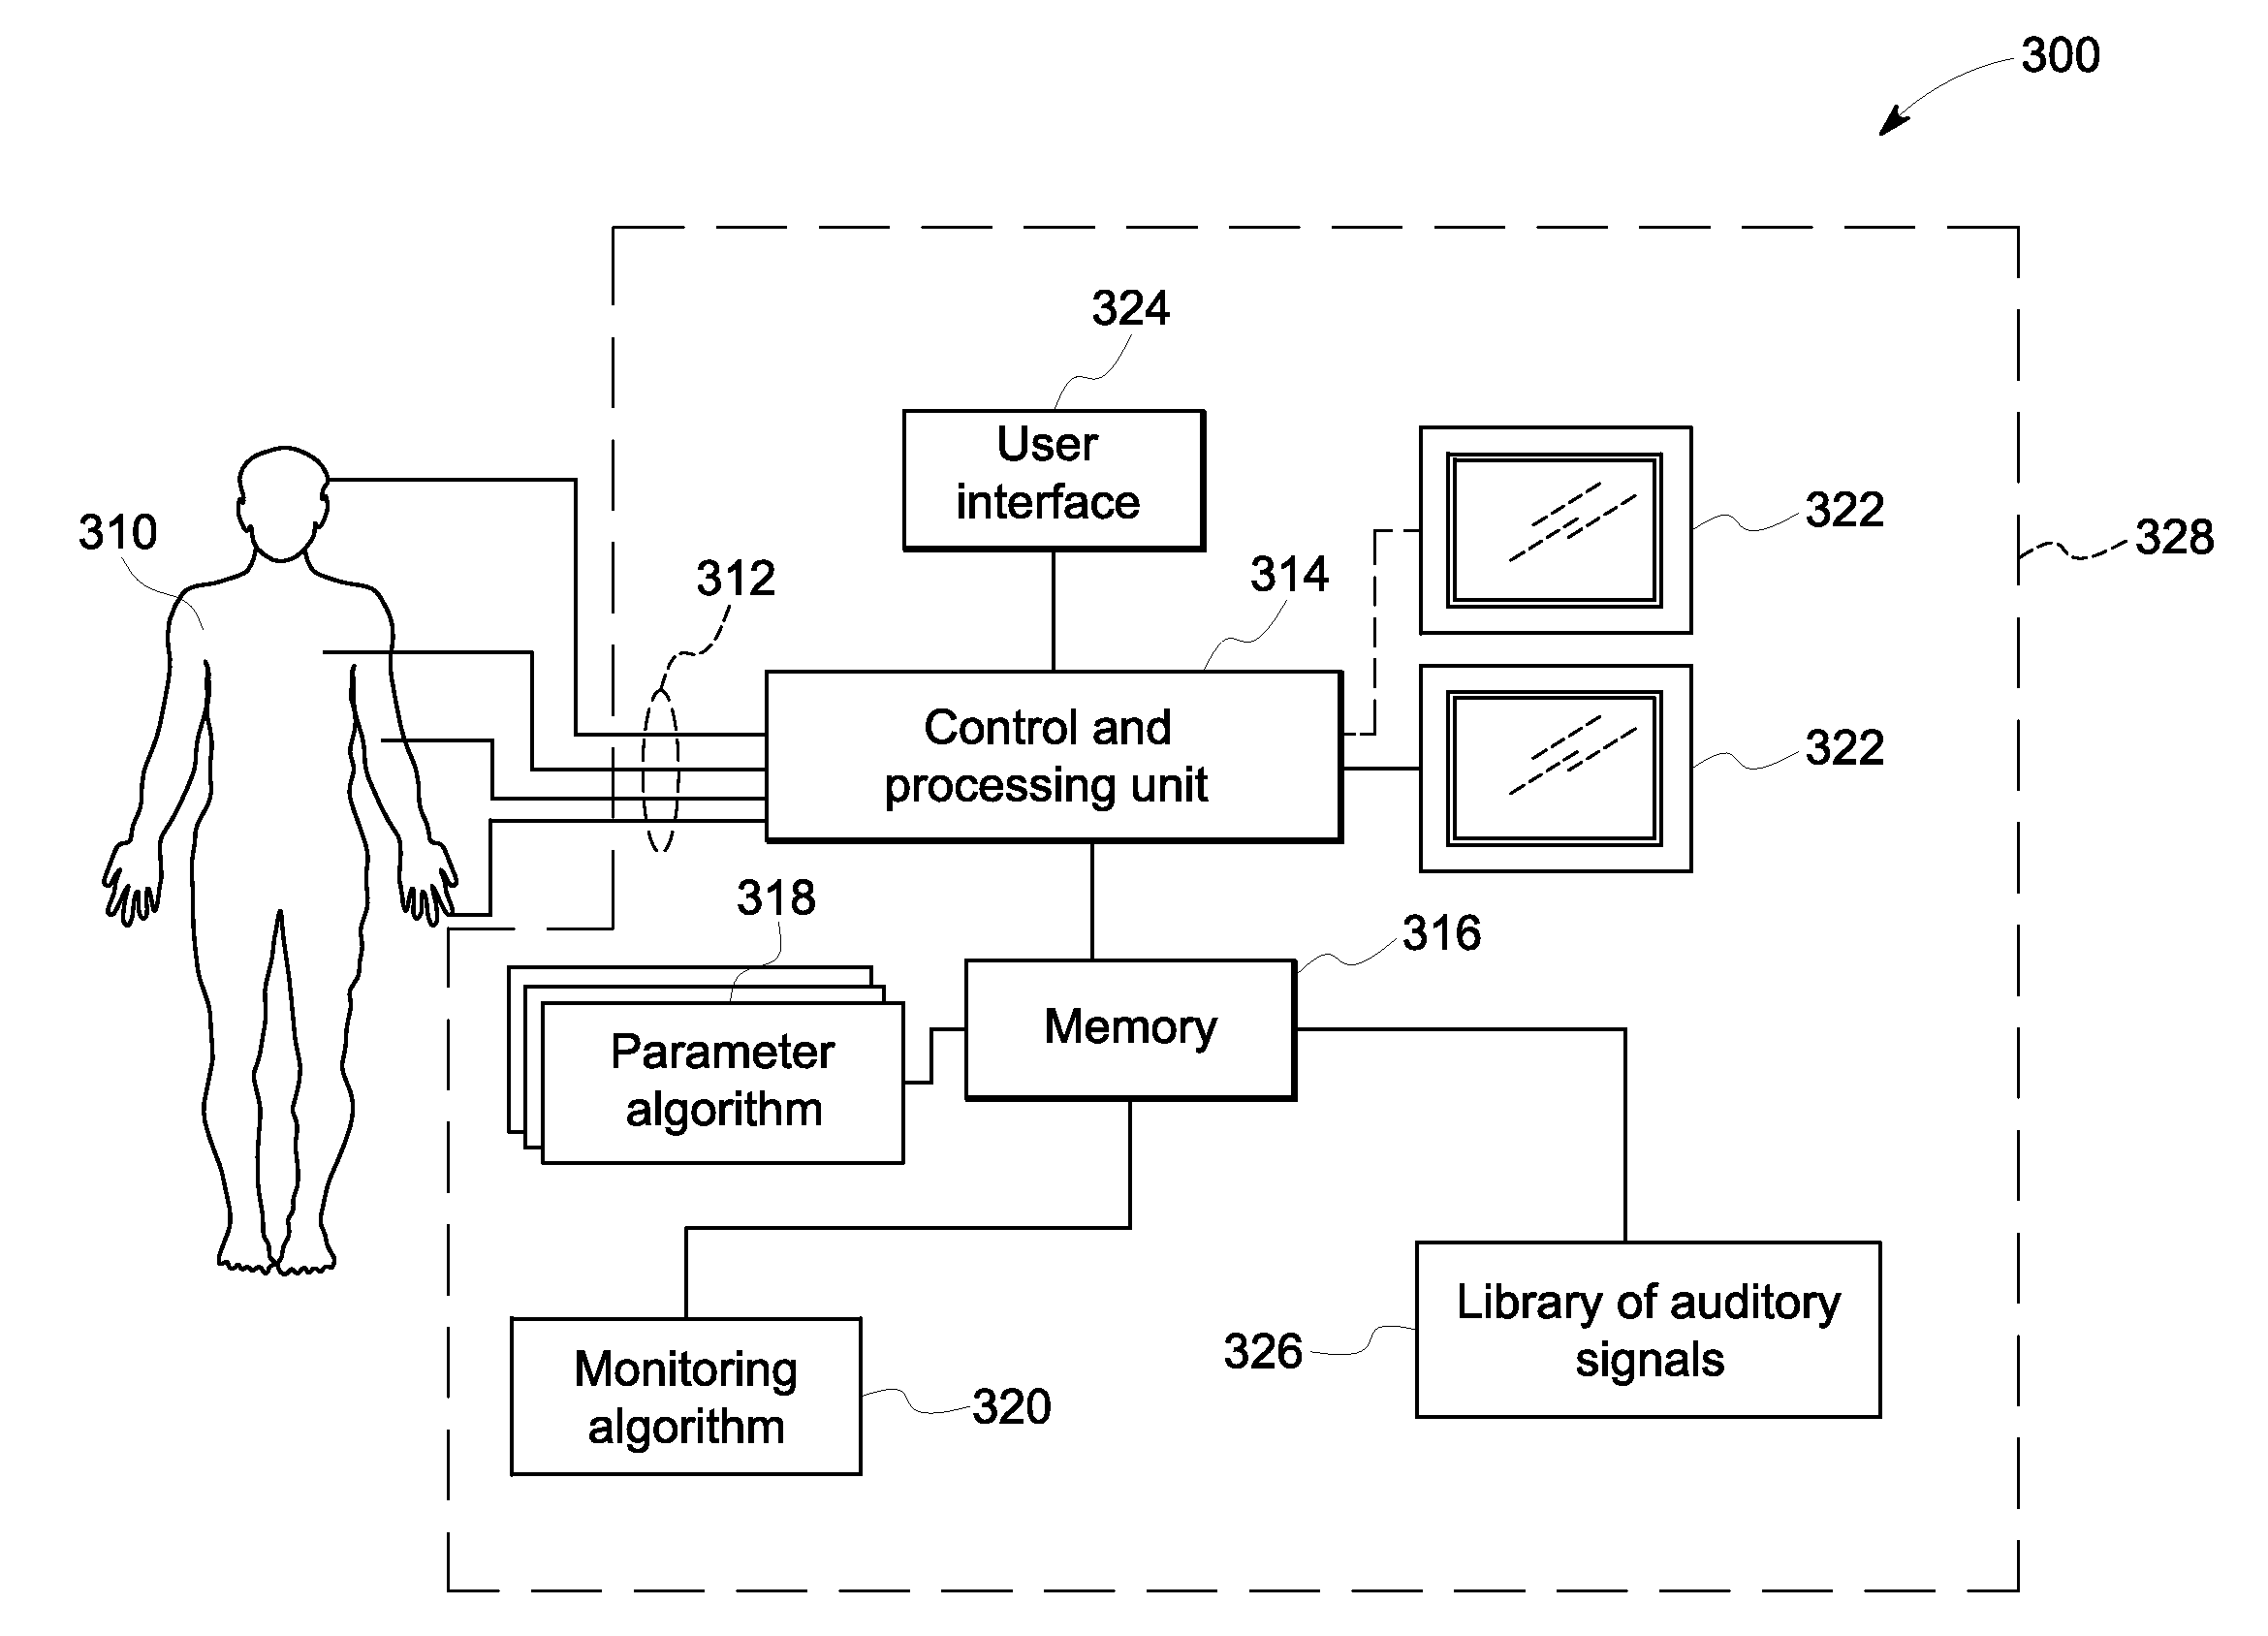 System and method for providing auditory messages for physiological monitoring devices